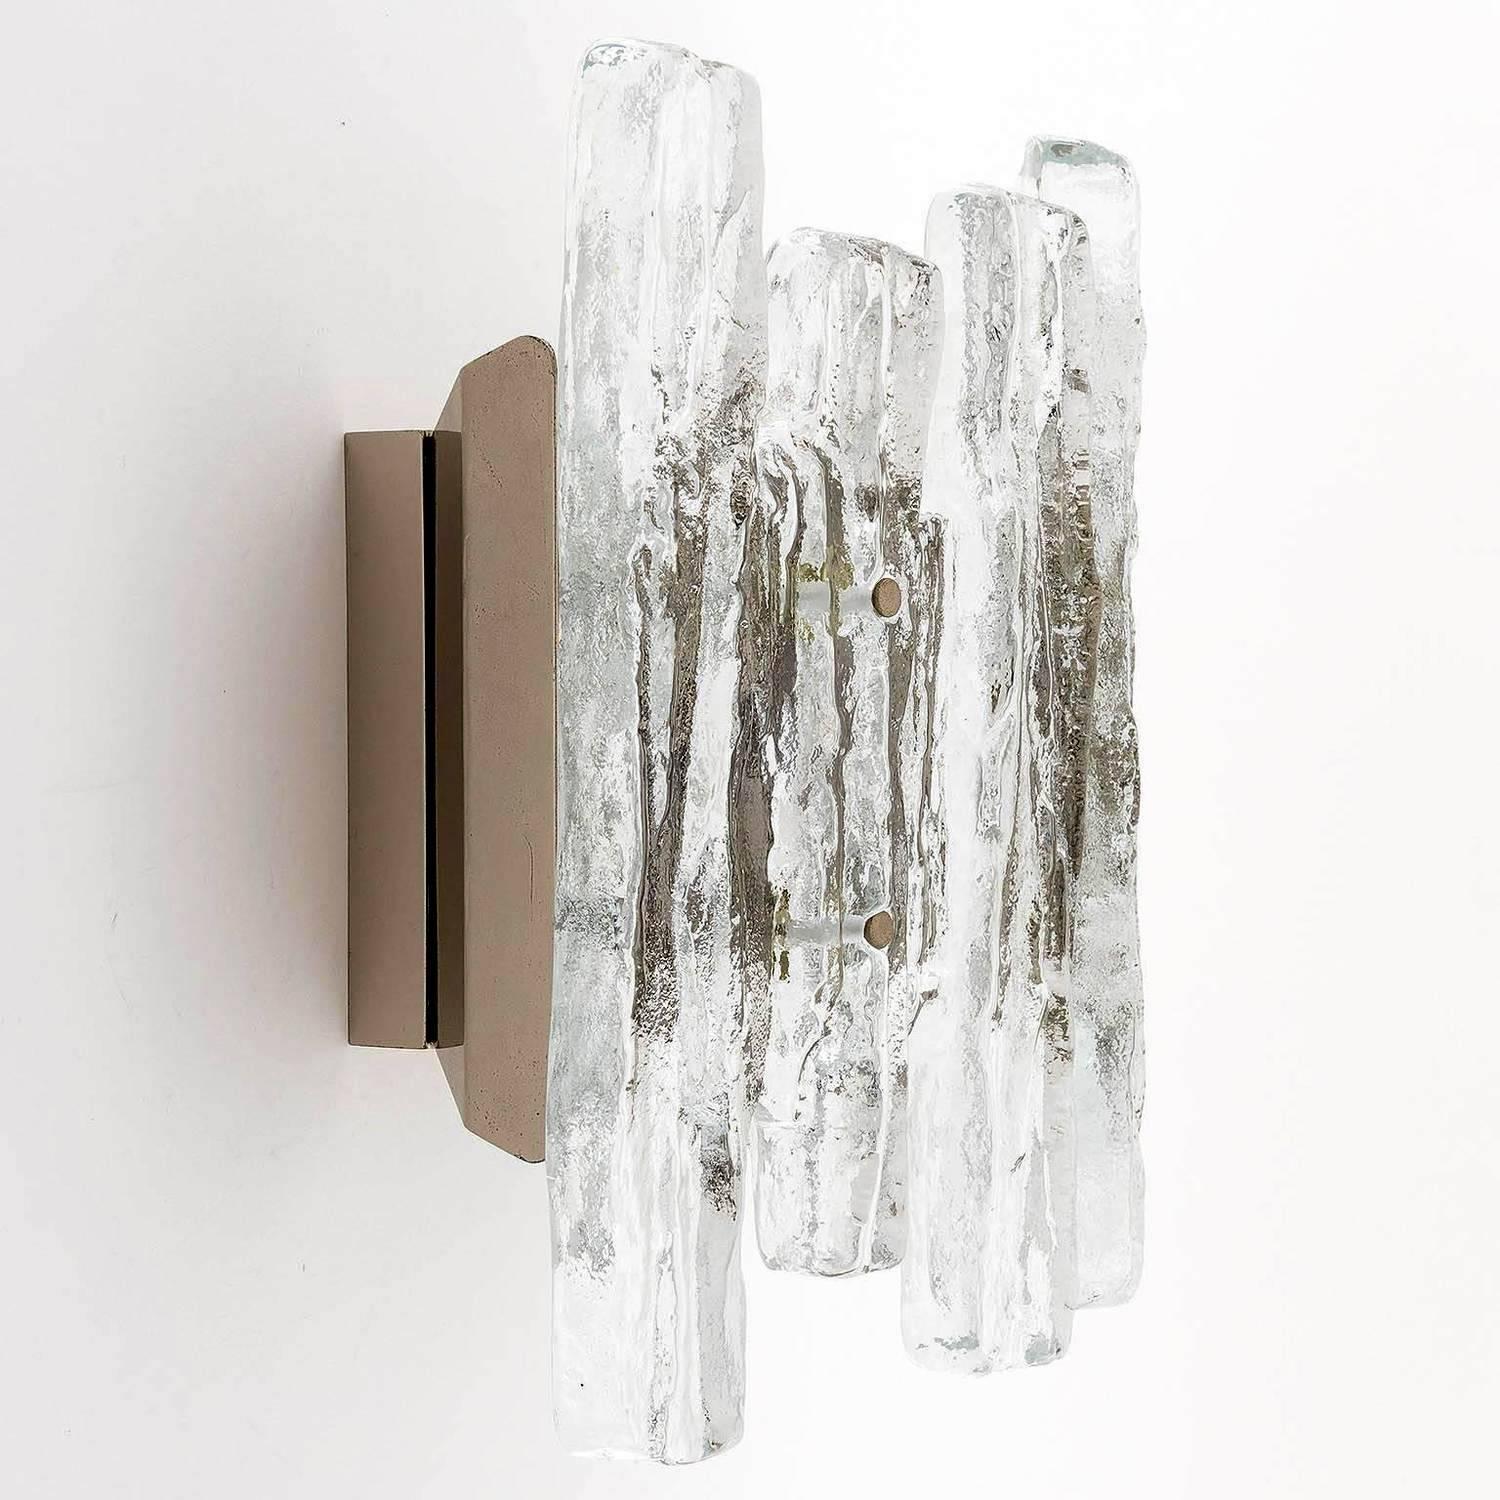 A beautiful pair of ice glass wall lights model 'PUCK' (no. 4518) by J.T. Kalmar, Austria, manufactured in midcentury, circa 1970 (late 1960s or early 1970s).
This is the rarer version of the icicle glass sconces from Kalmar with larger glasses and